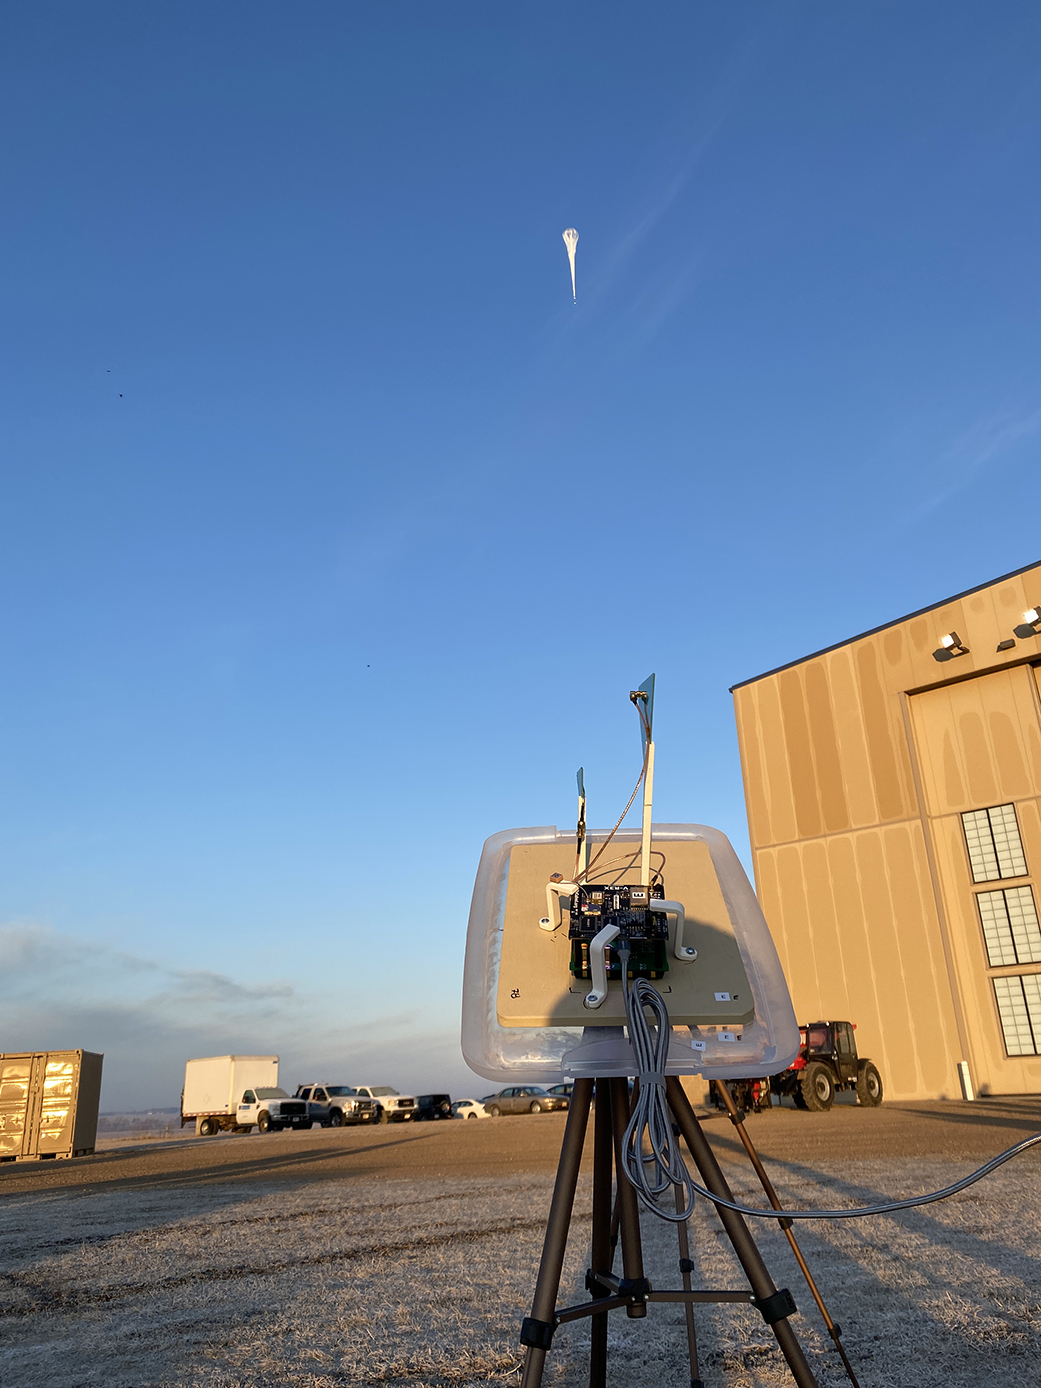 The V-R3x ground station at the launch site tracks the V-R3x payload aboard Raven’s high-altitude balloon